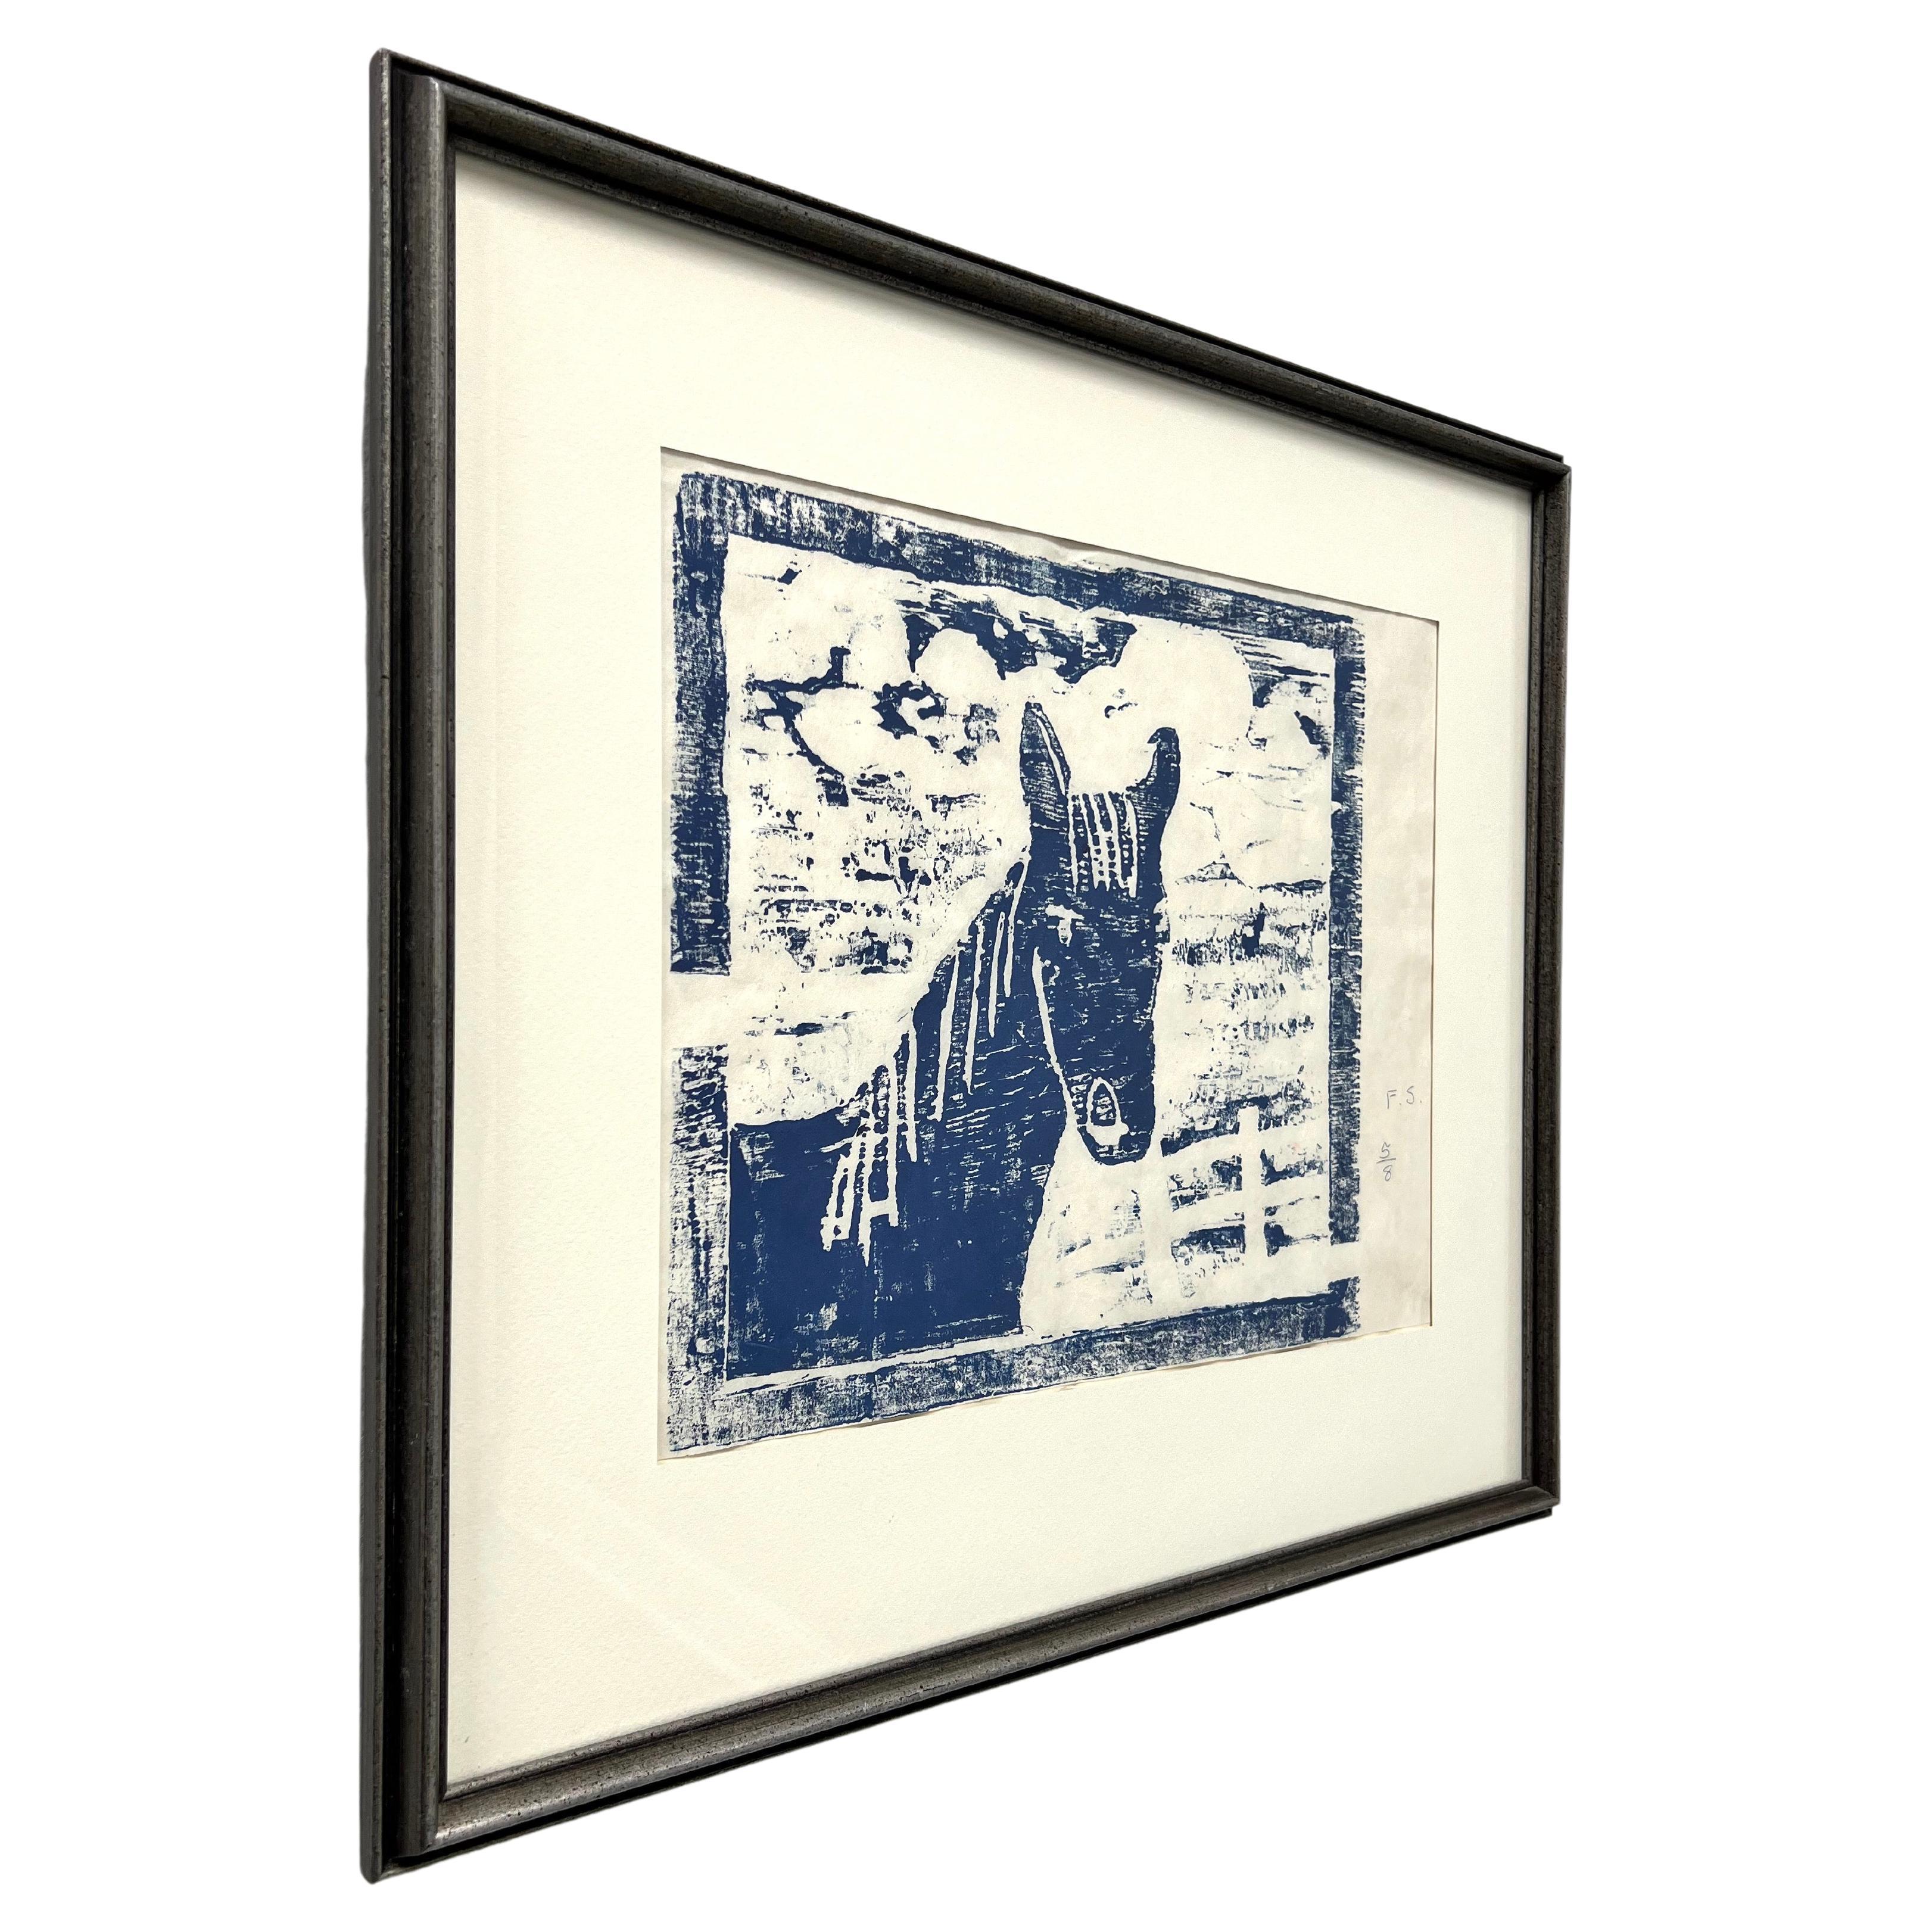 Mid 20th Century Wood Block Print "Blue Horse" by Fran Stewman For Sale